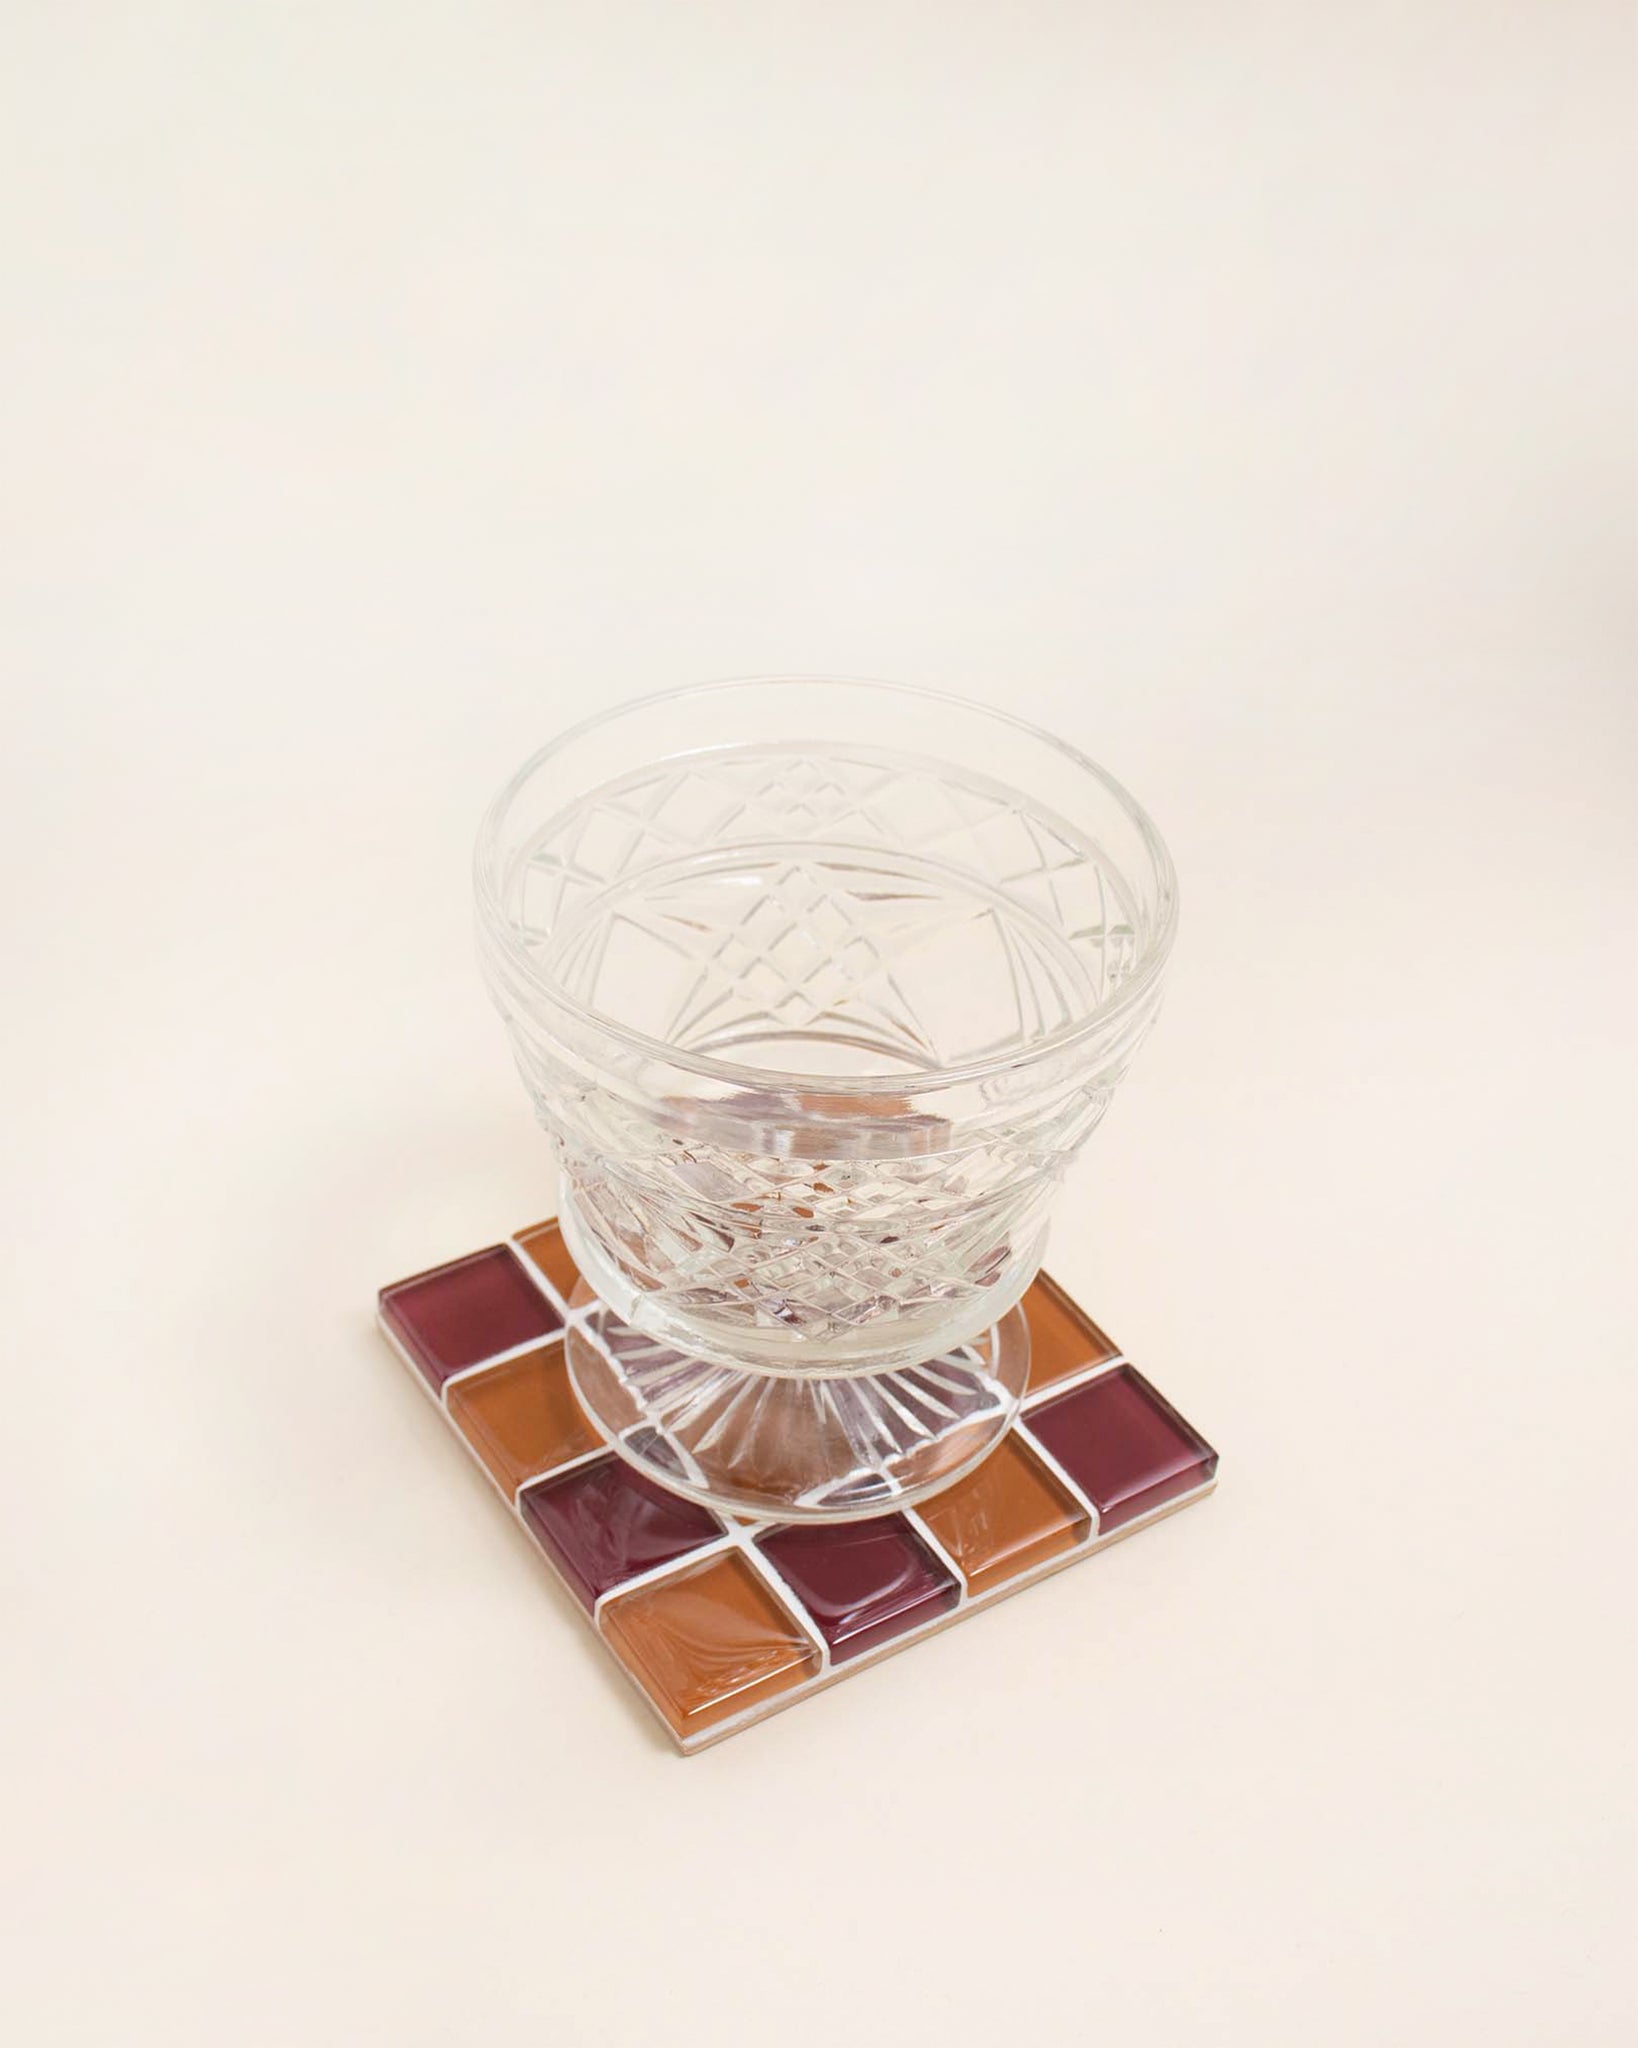 GLASS TILE COASTER - The Old Day